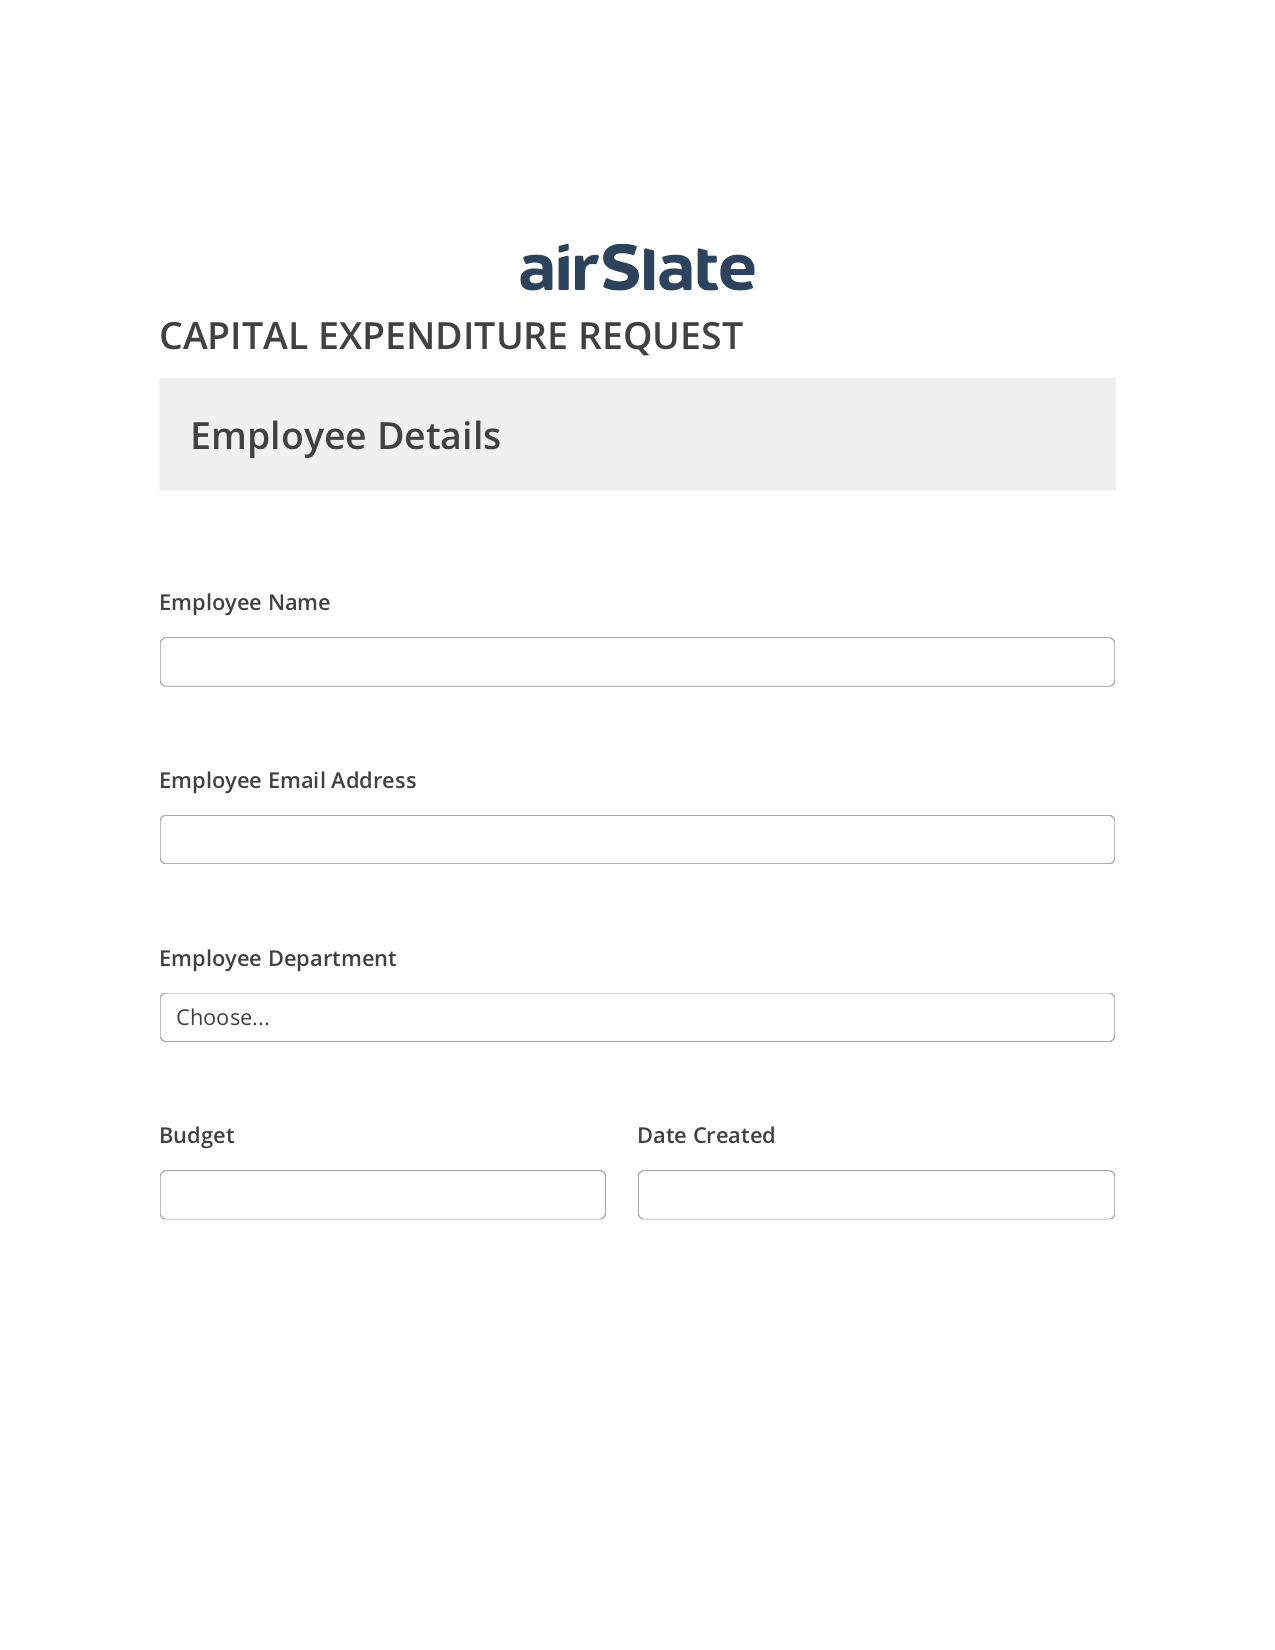 Capital Expenditure Request Approval Workflow Pre-fill from Excel Spreadsheet Dropdown Options Bot, Lock the Slate Bot, Archive to SharePoint Folder